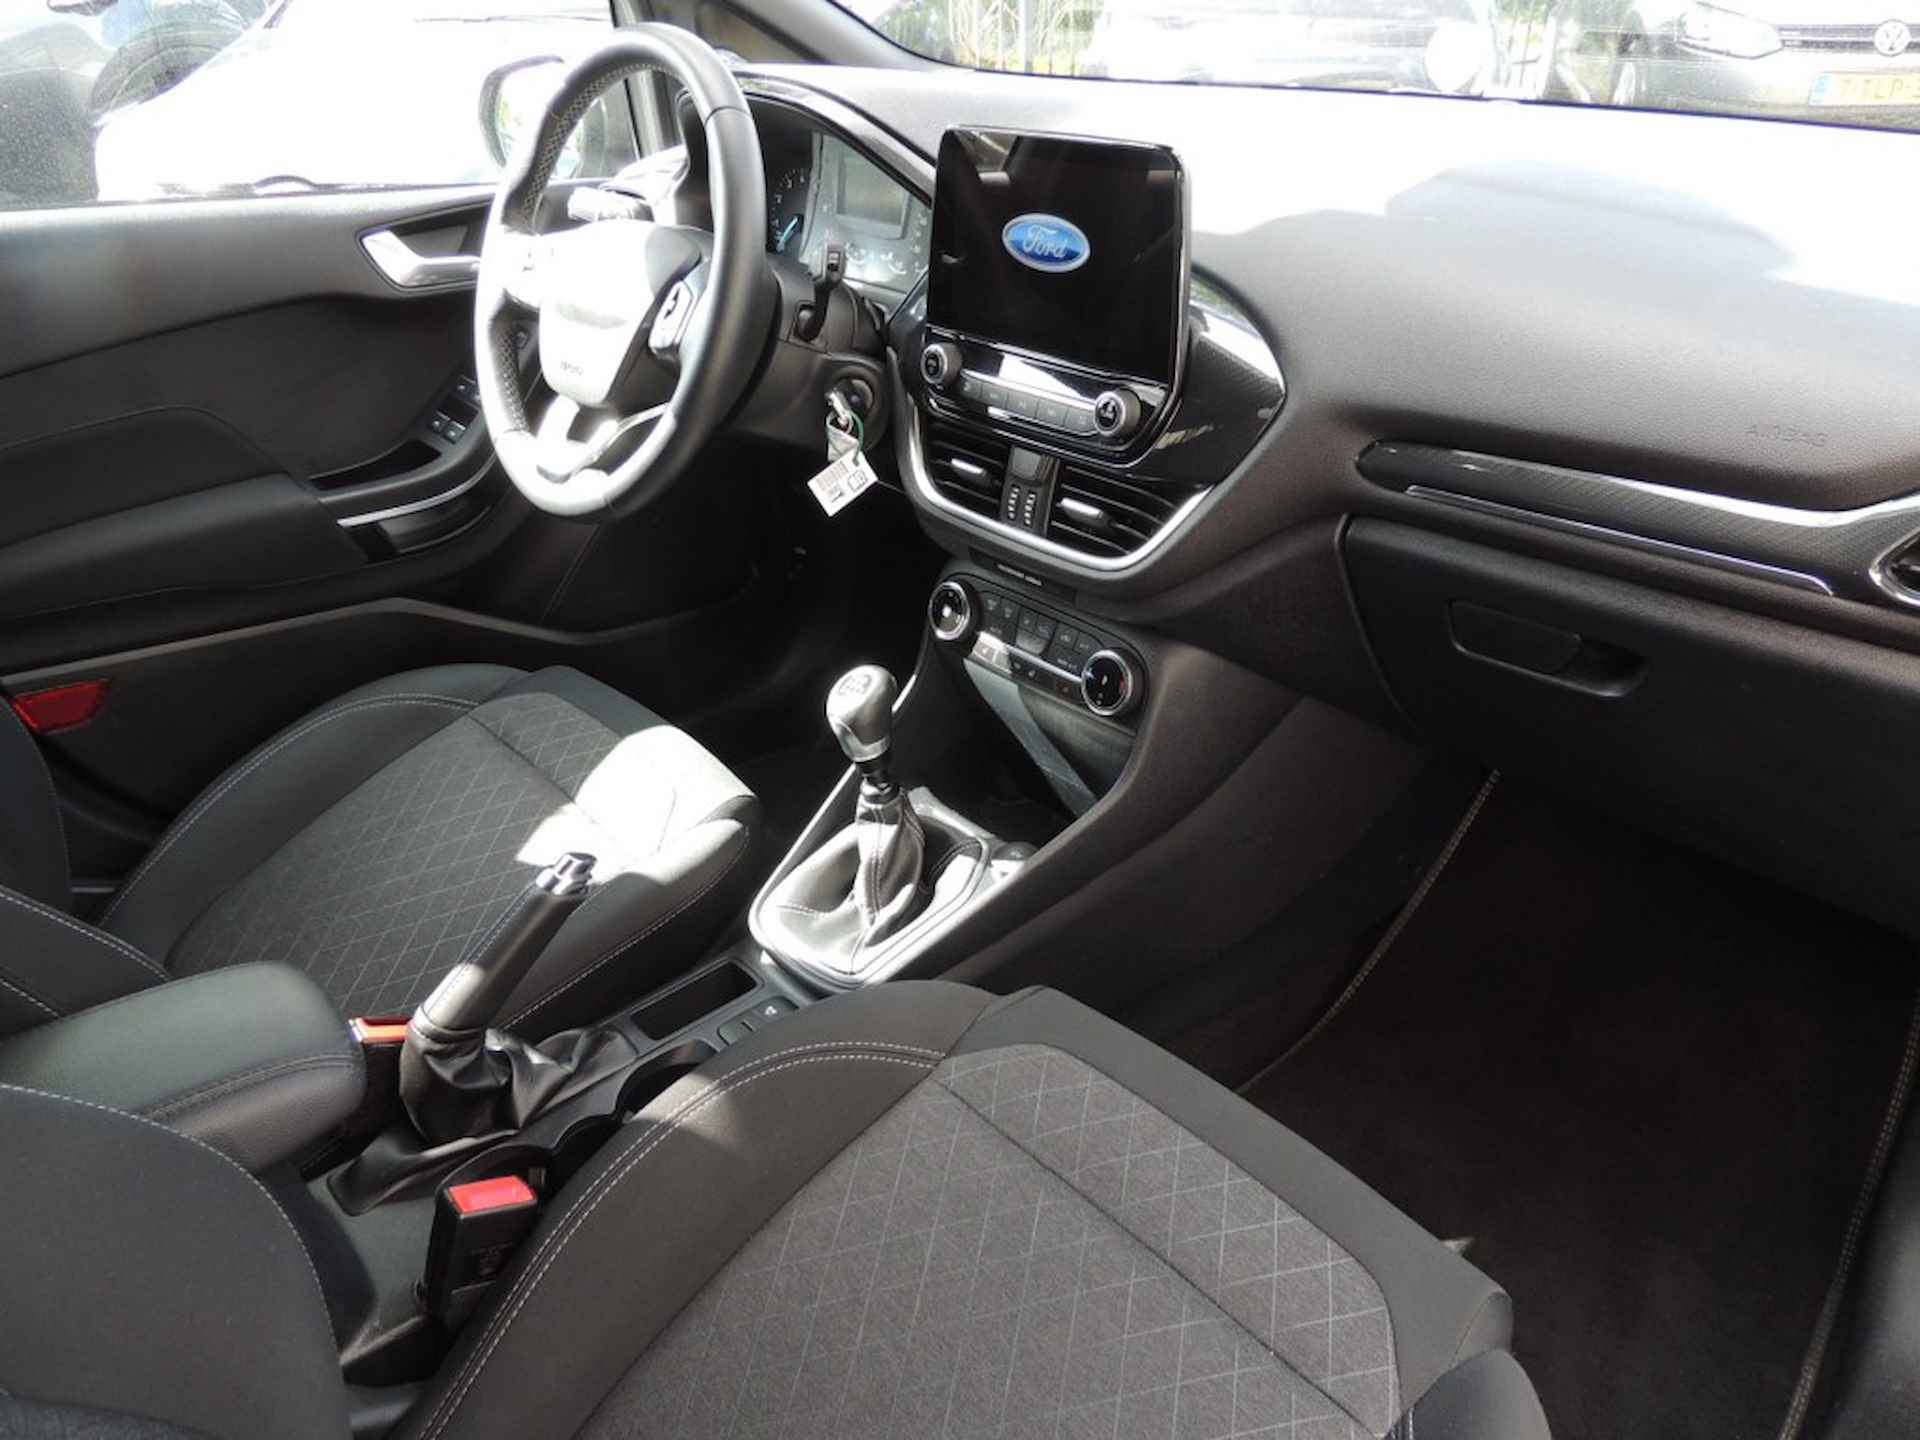 FORD Fiesta 1.0 ECOB. ACTIVE X Full Options  Clima - 9/20